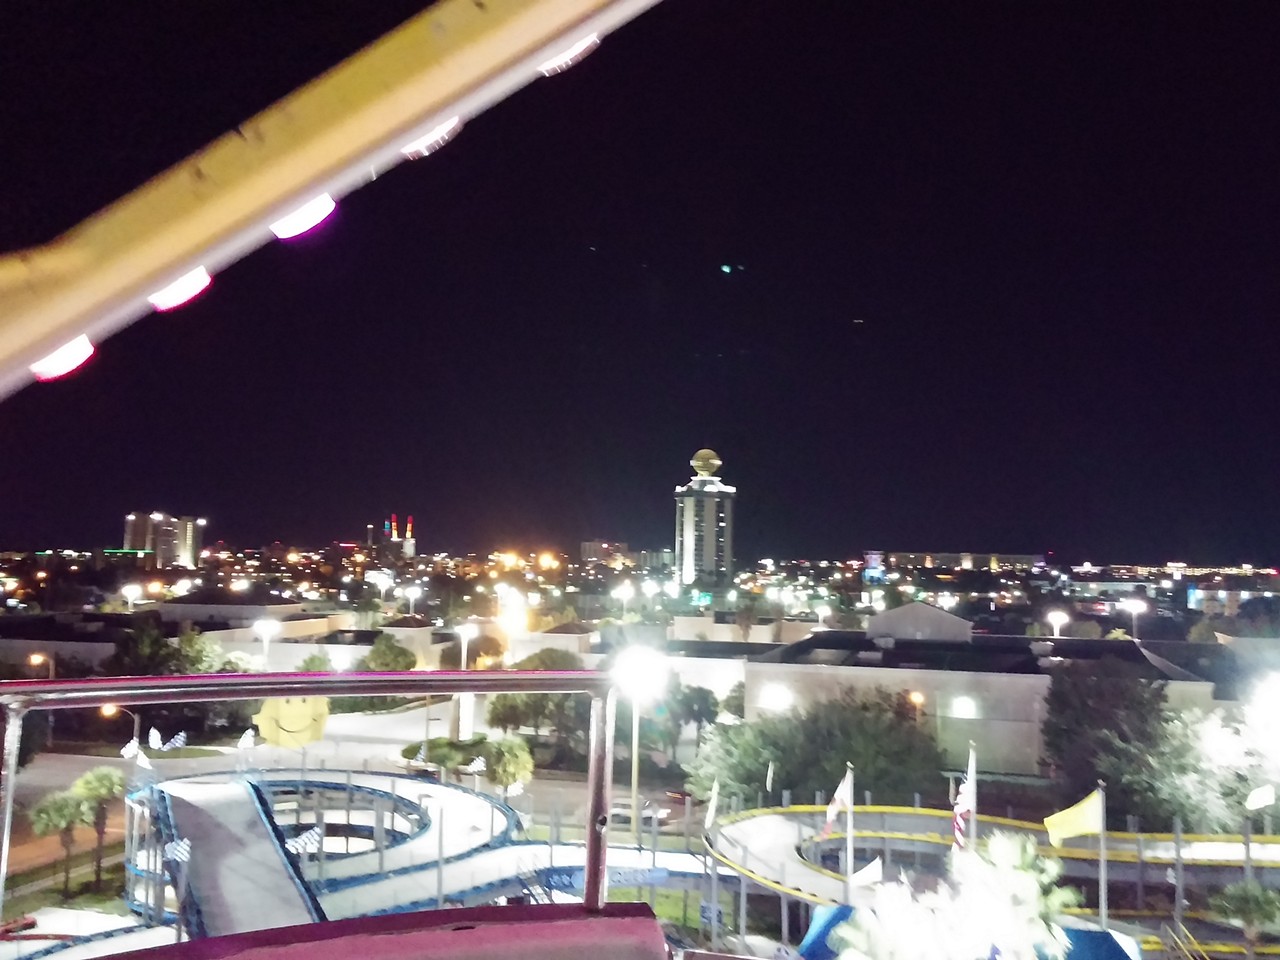 The view from the top of the Fun Spot Ferris wheelRelated: 13 reasons to love the expansion of Orlando's Fun Spot